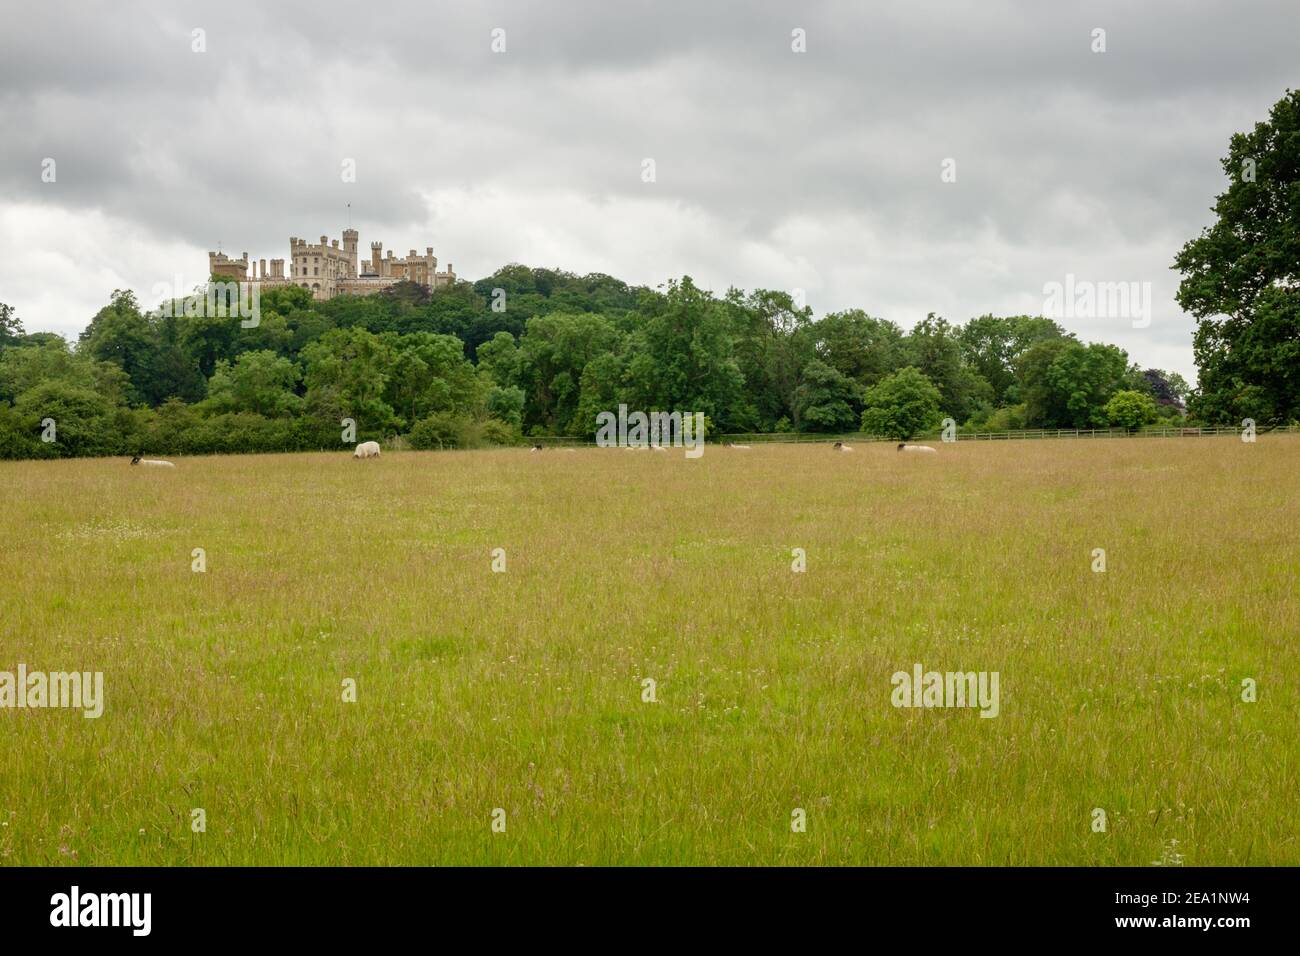 View across farmland of Belvoir castle, home to the Duke and Duchess of Rutland England UK Stock Photo